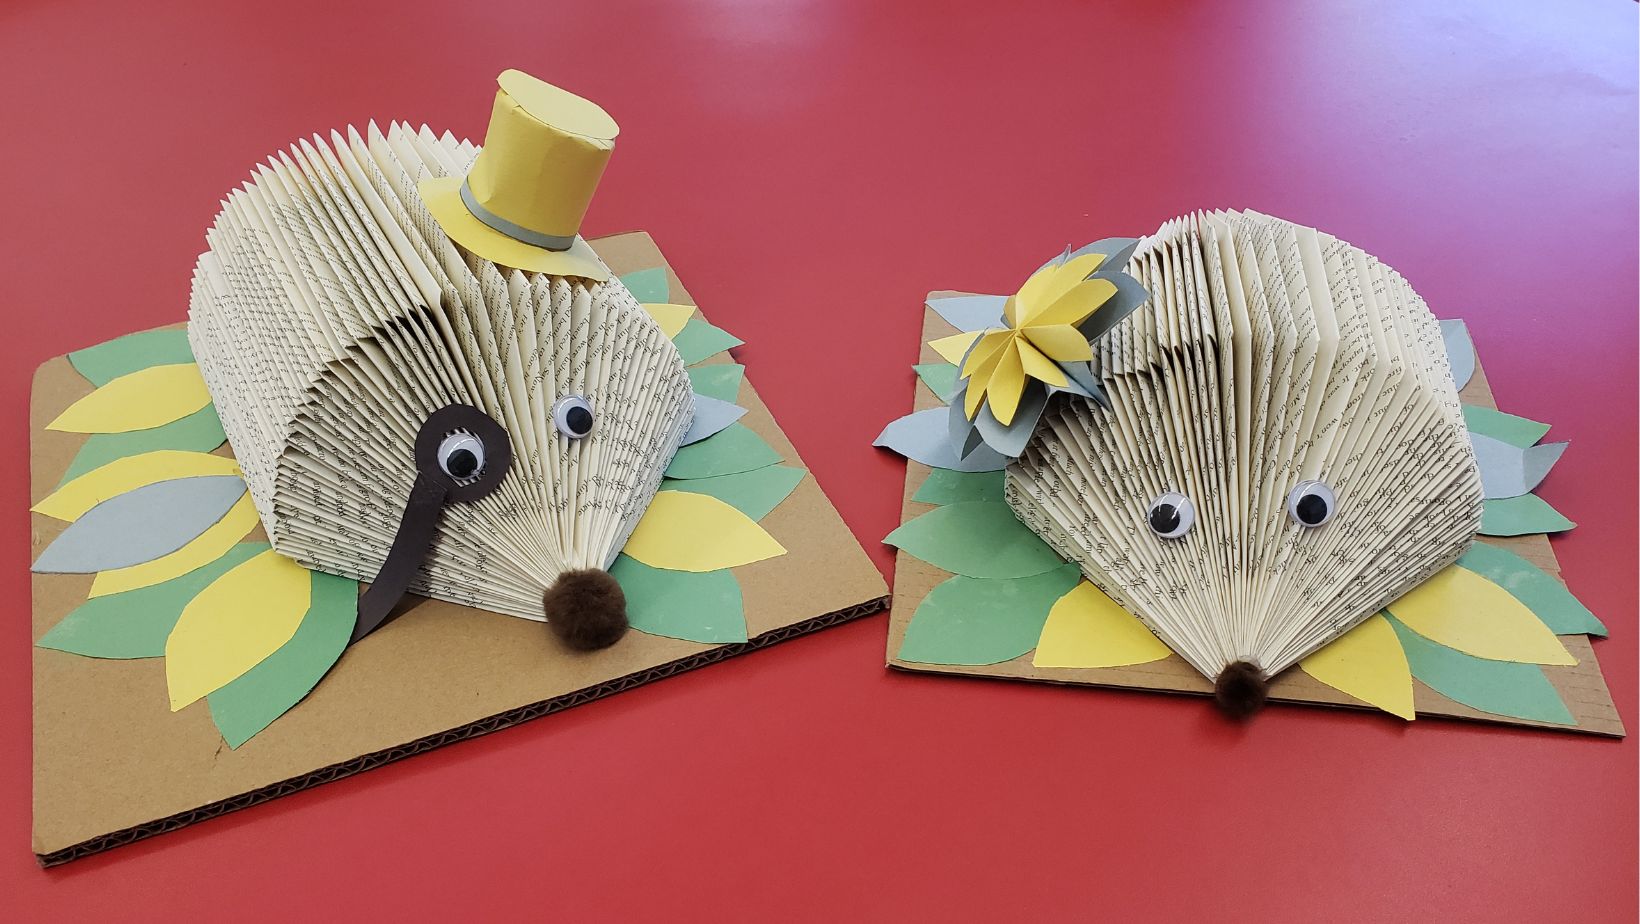 Example Book Hedgehogs on a Red Background